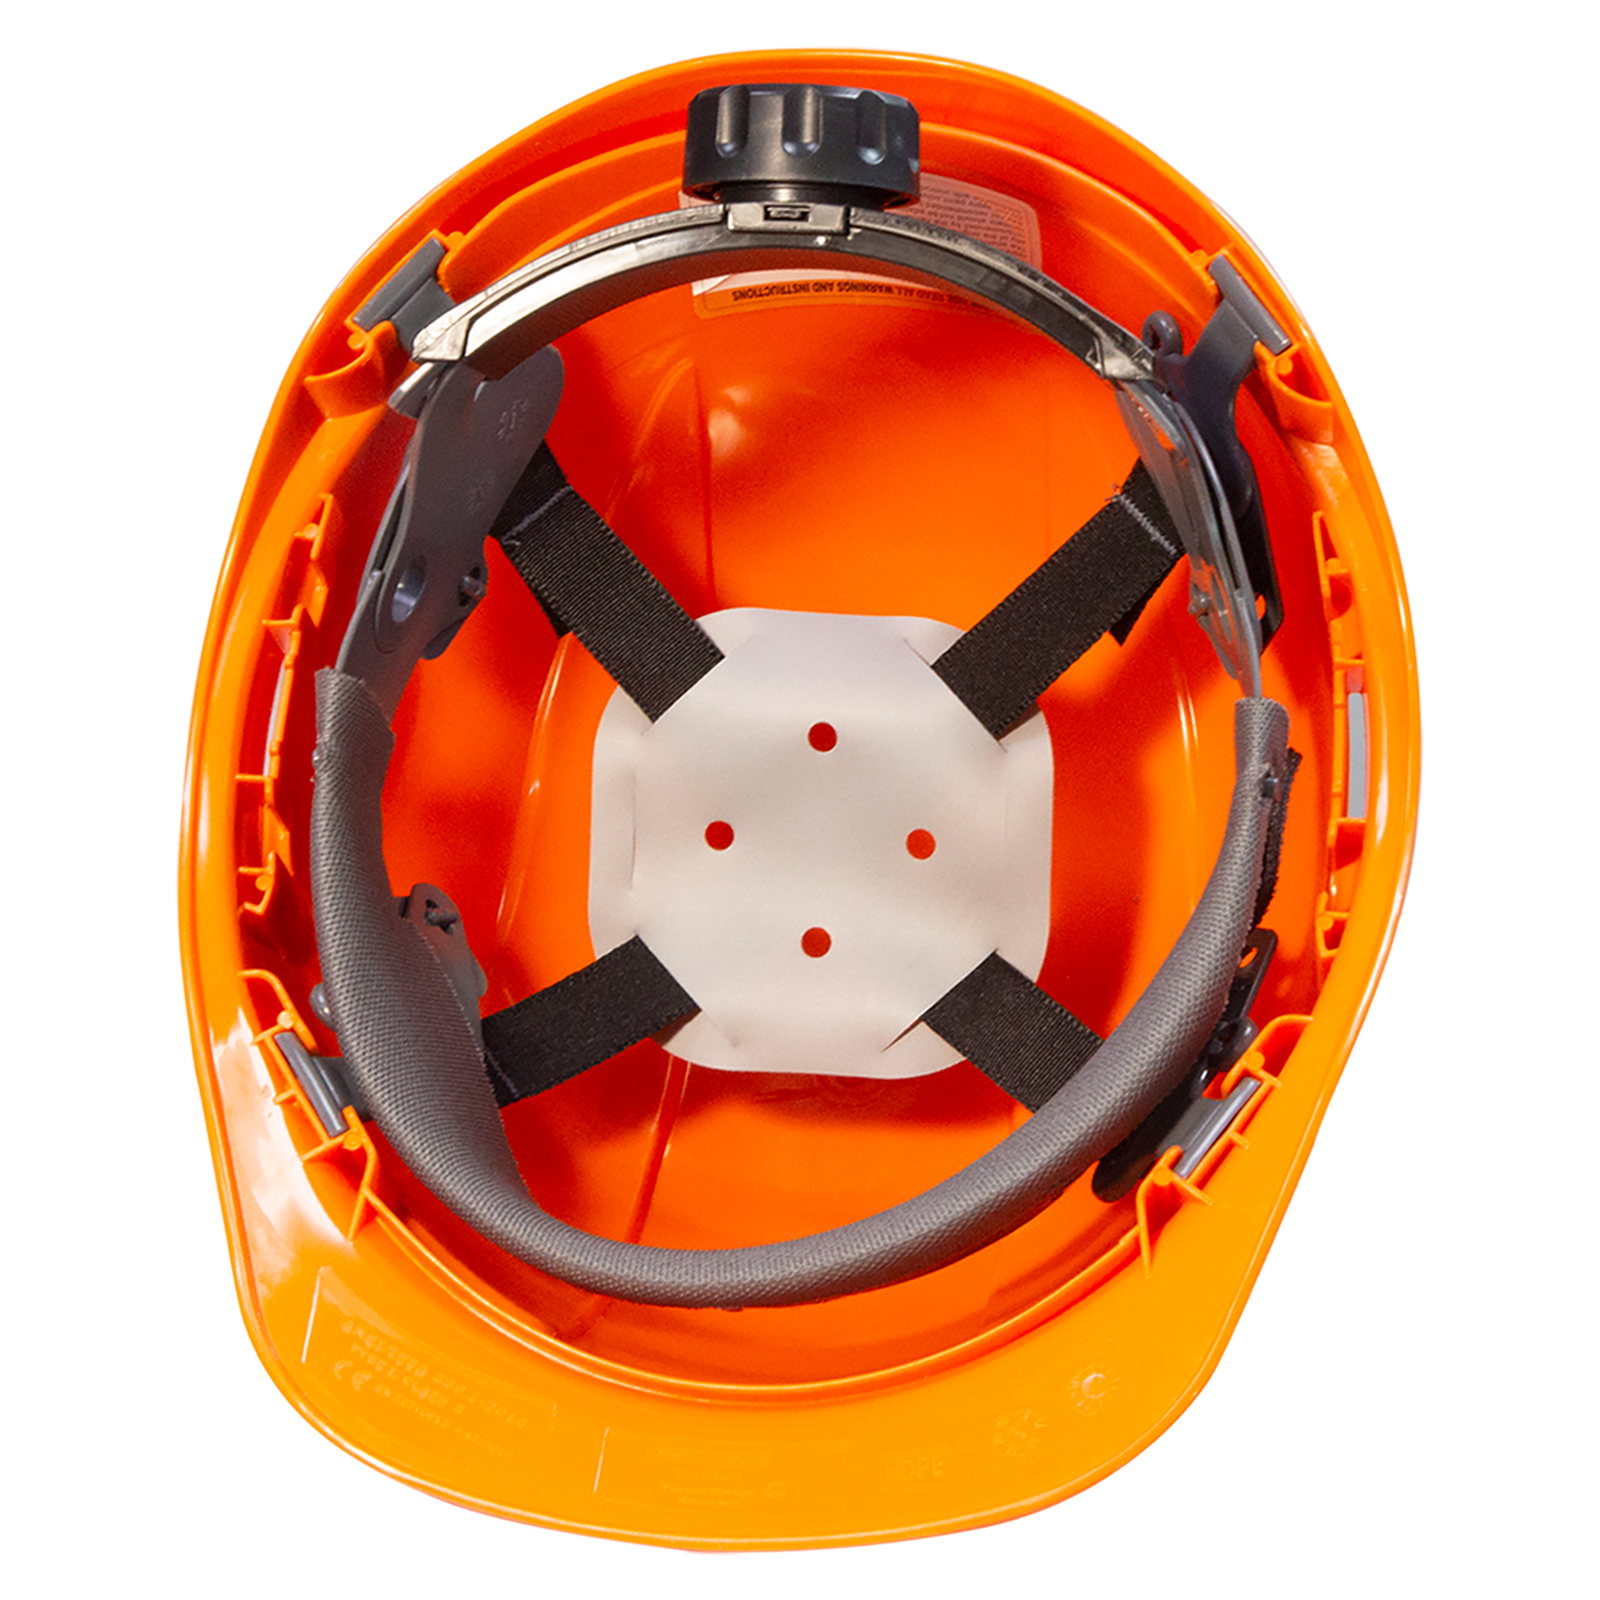 Inside part of the ANSI compliant hard hat with the 4 point suspension installed